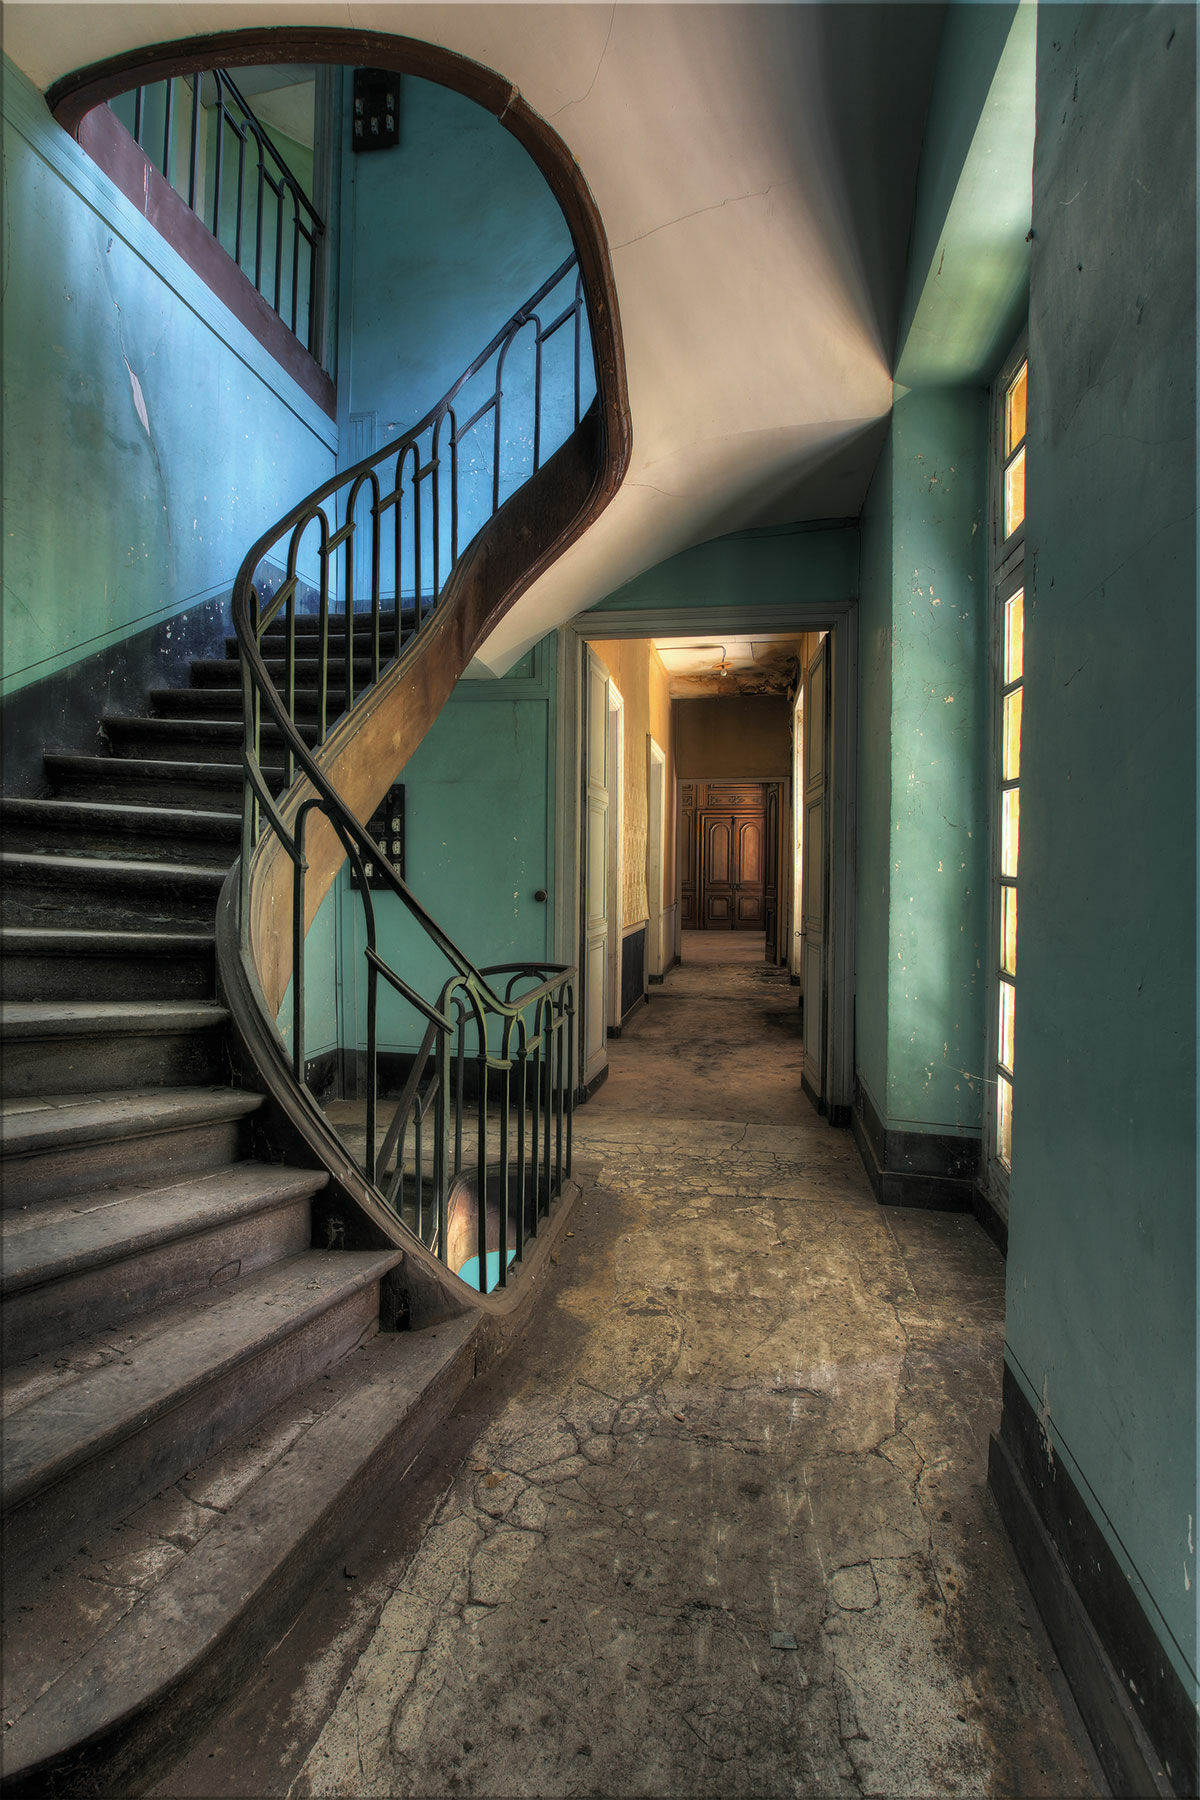 Picture "Used stairs" by Olivier Lacour